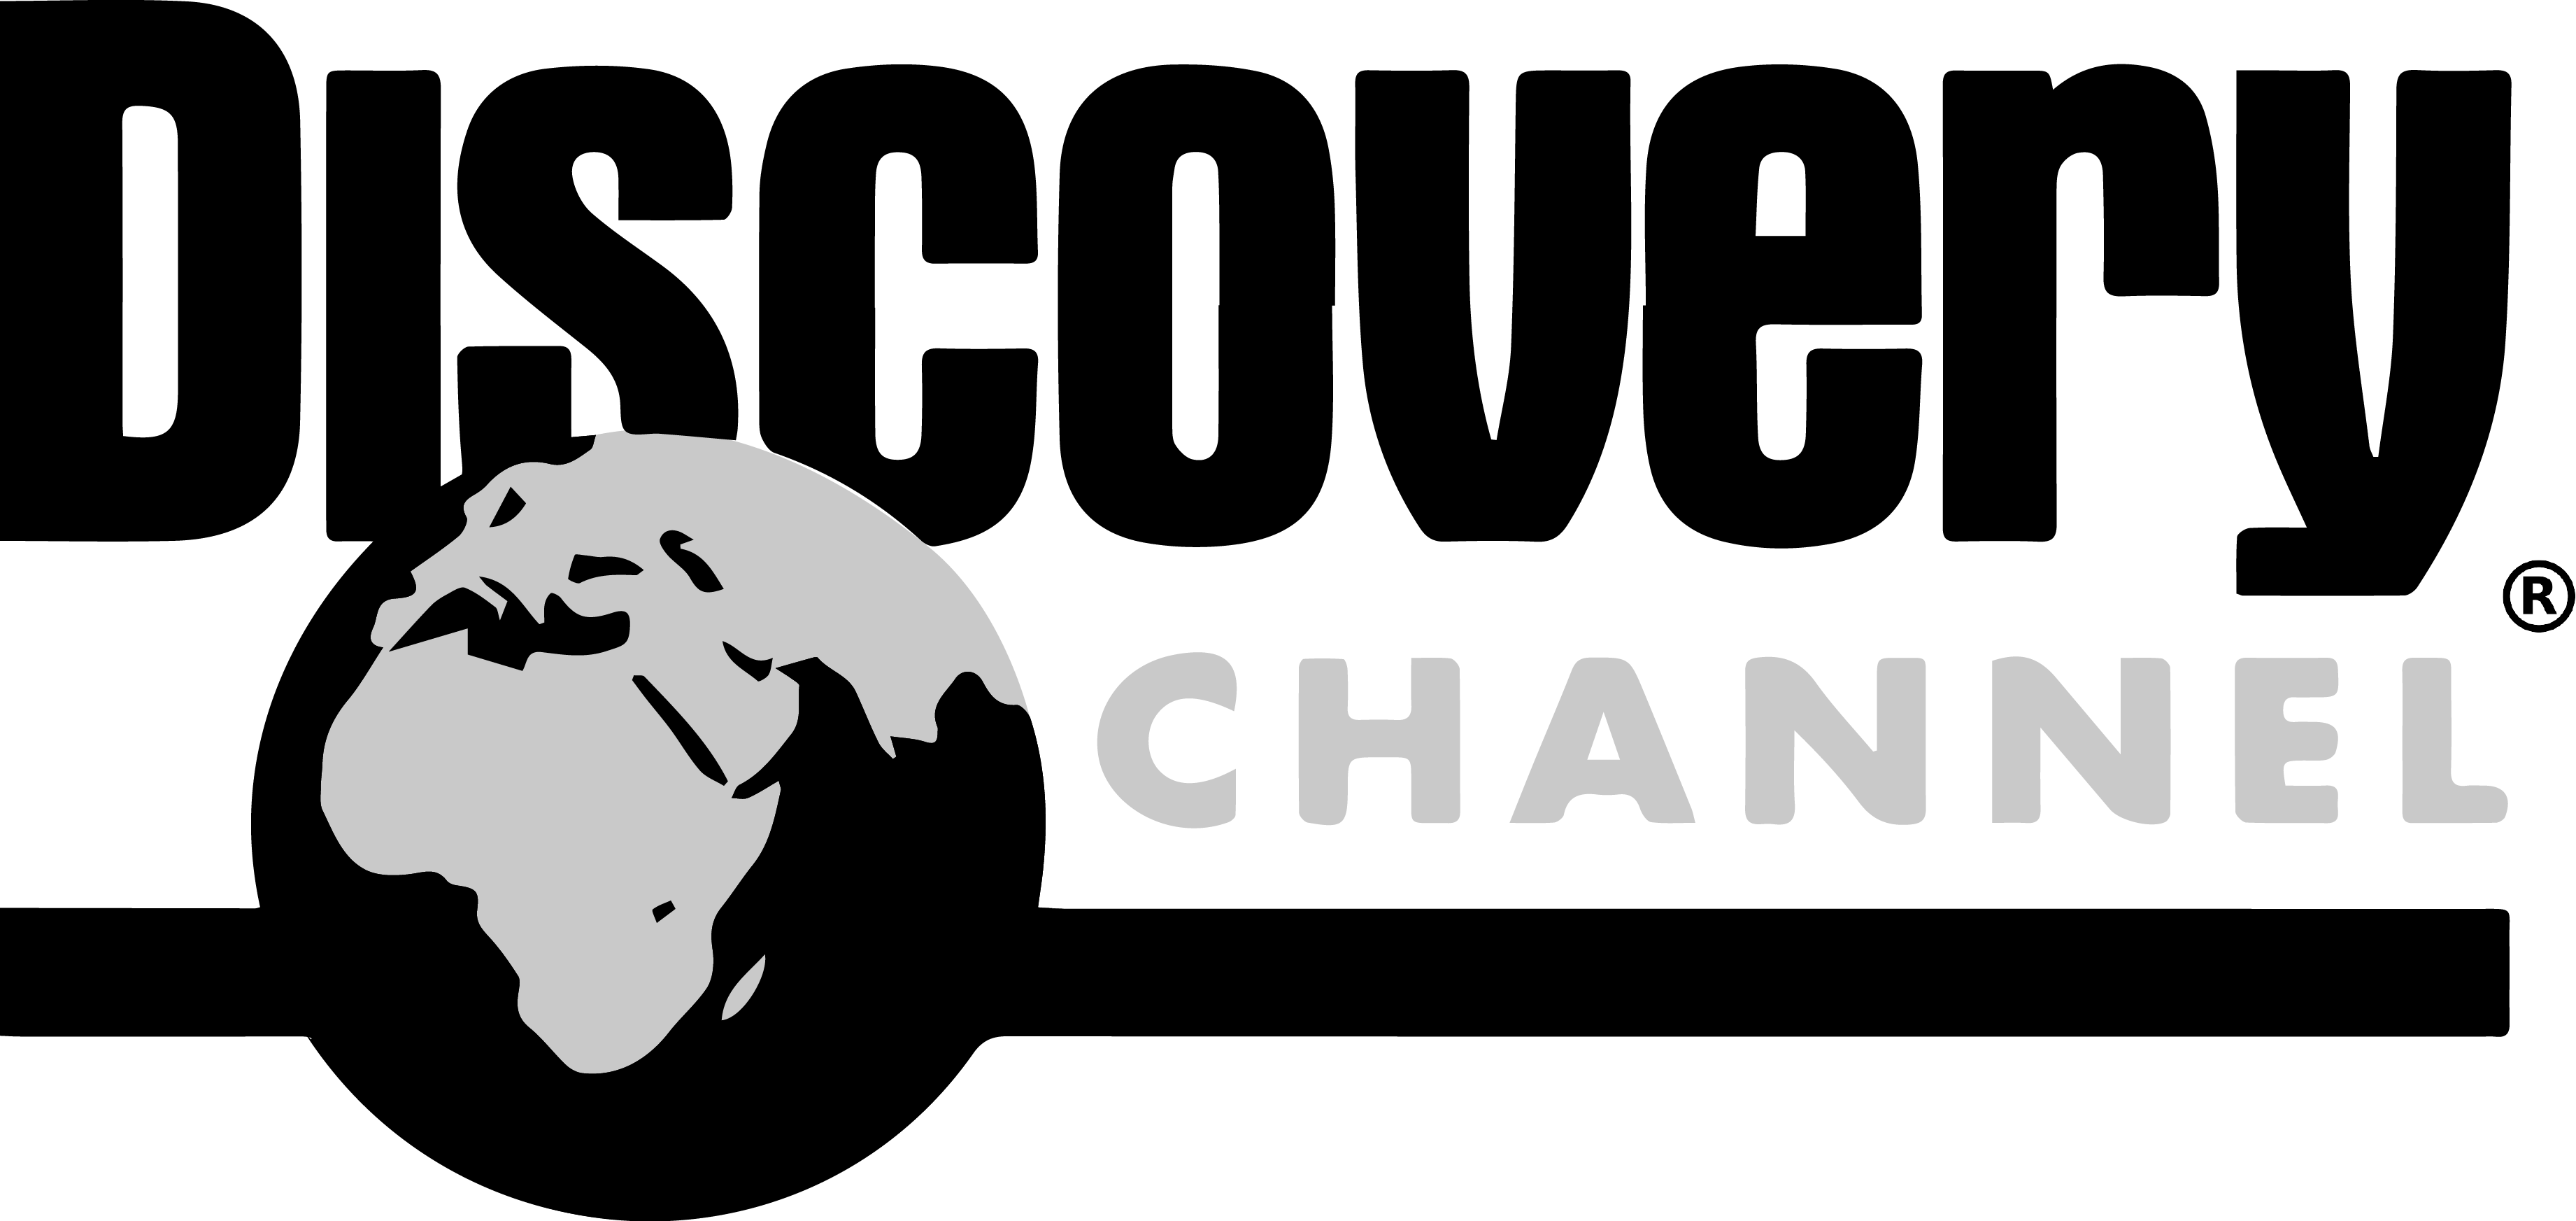 Discovery.com Logo - discovery-channel-2 - Sonny